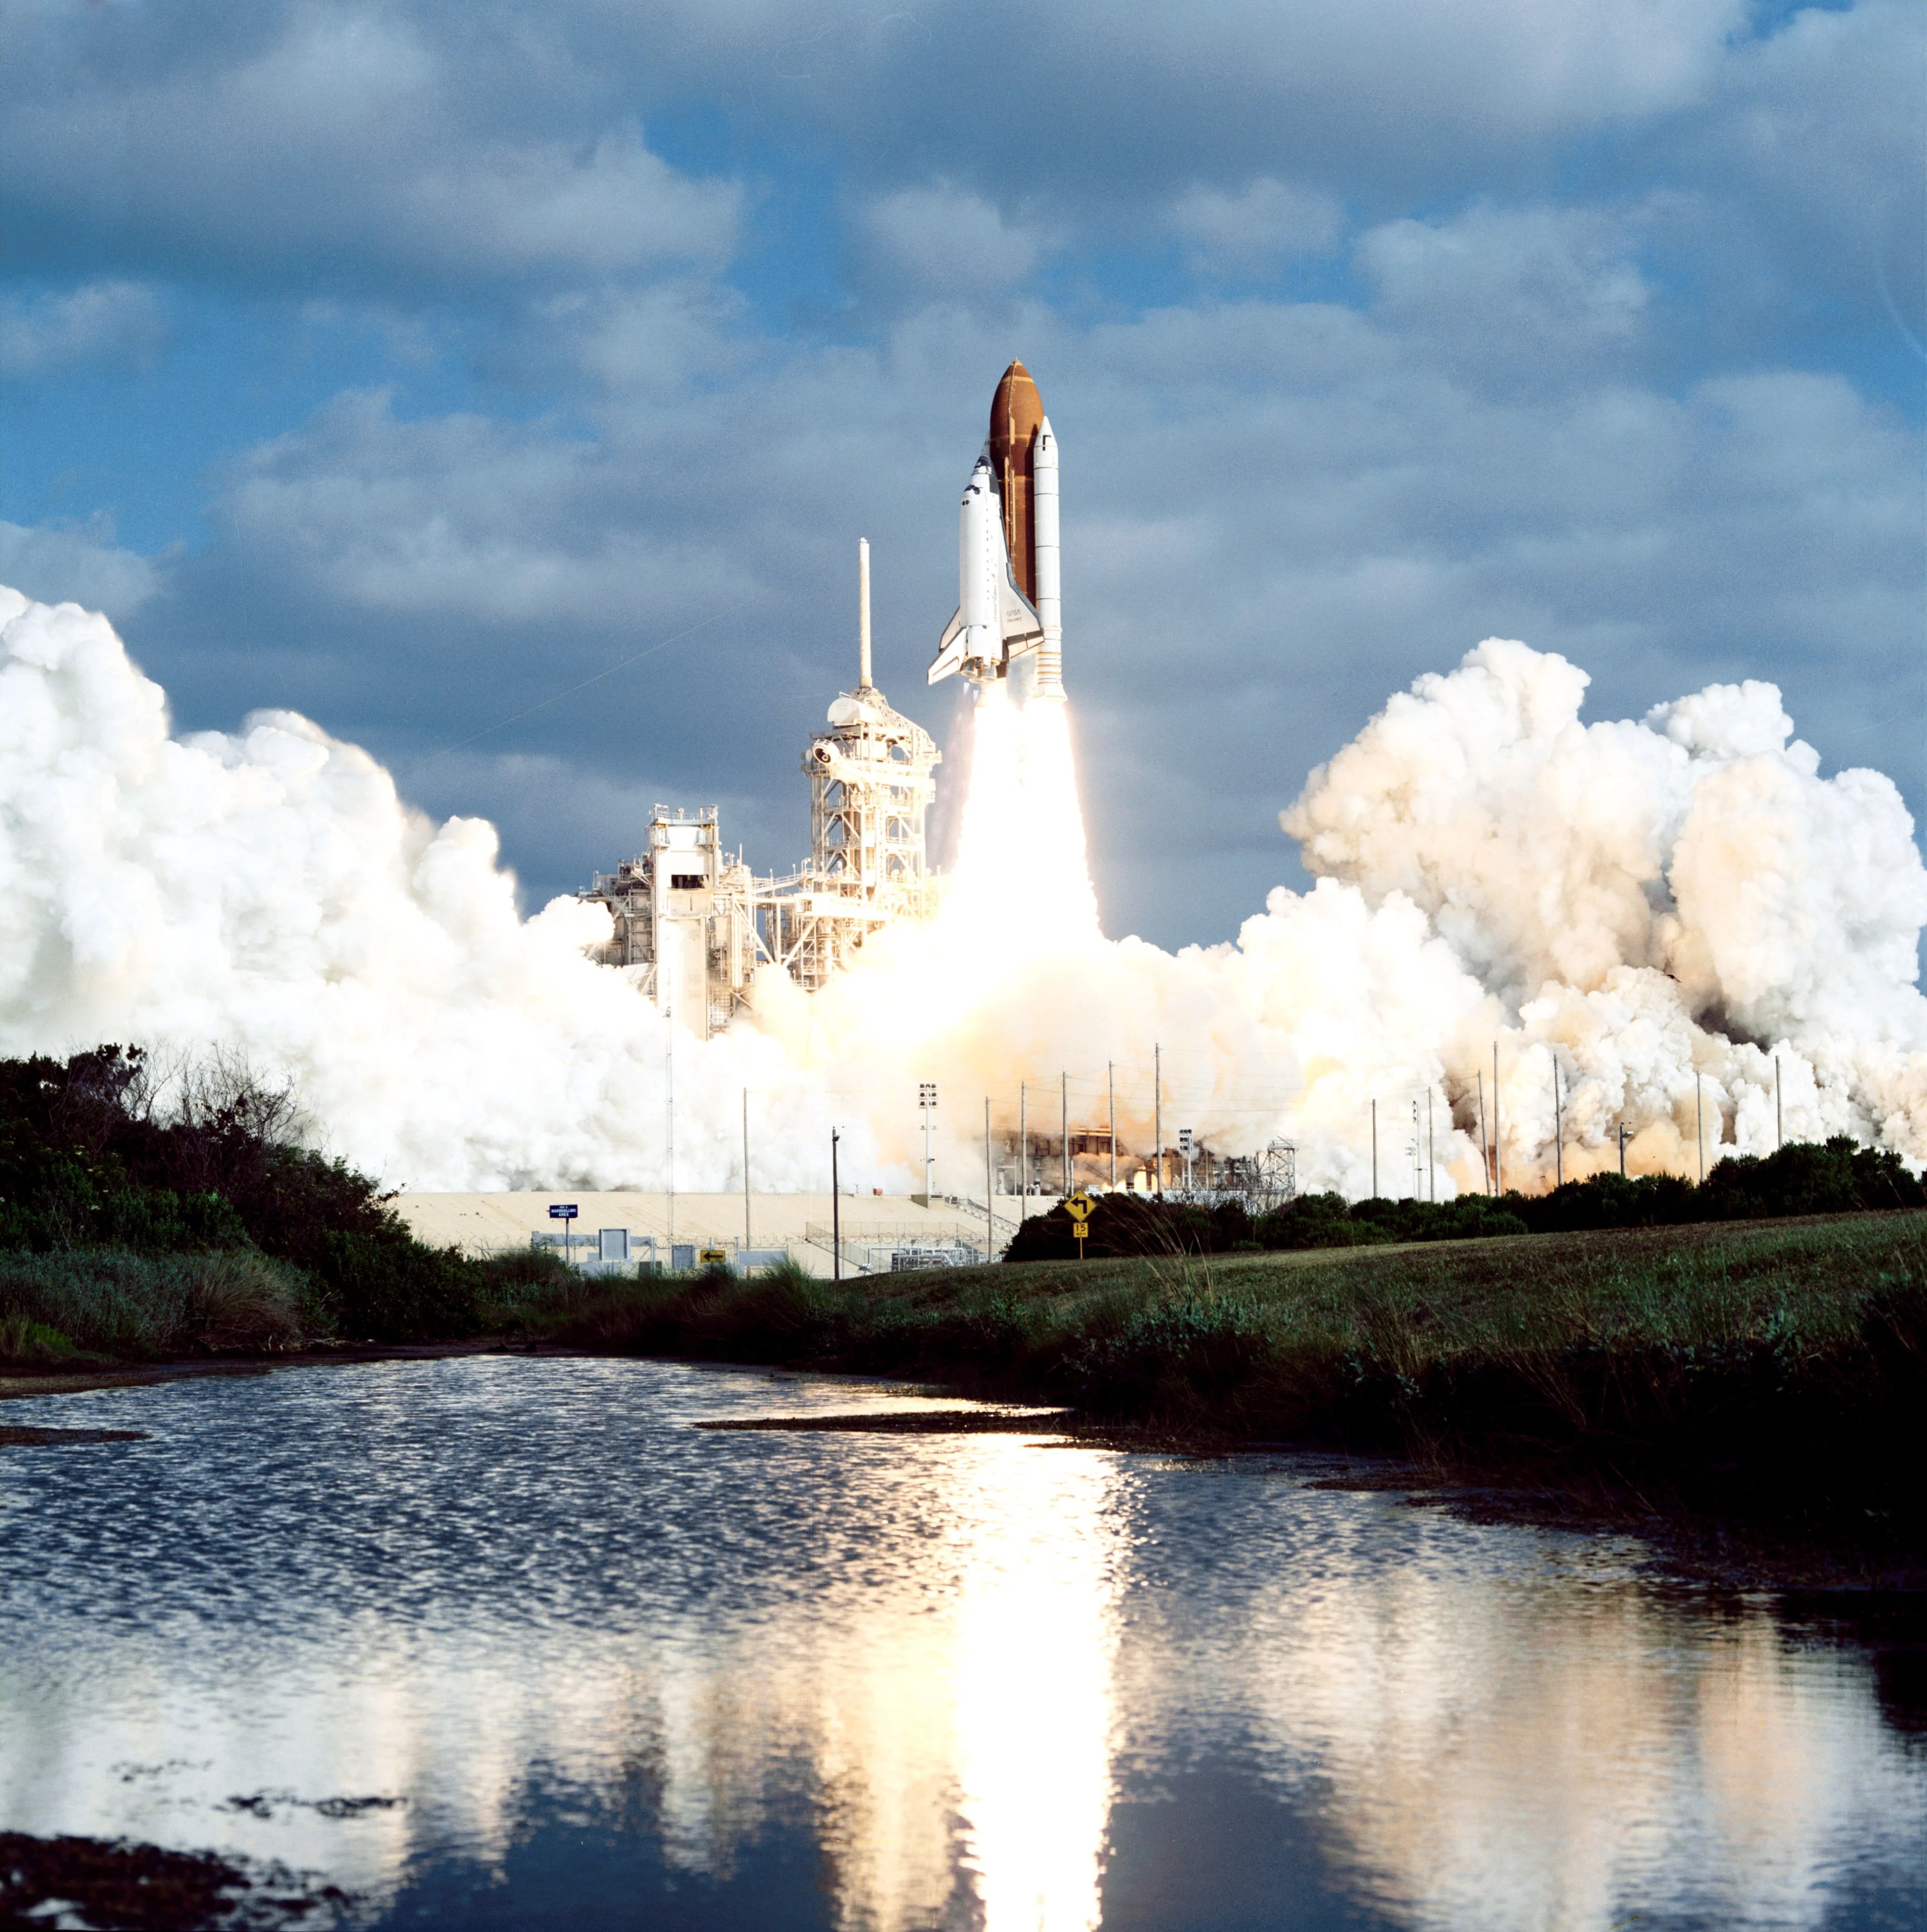 Clouds of steam and smoke billow as the Space Shuttle Discovery launches into blue skies, with Hubble aboard. the fire of the engines is reflected in a body of water in the foreground.